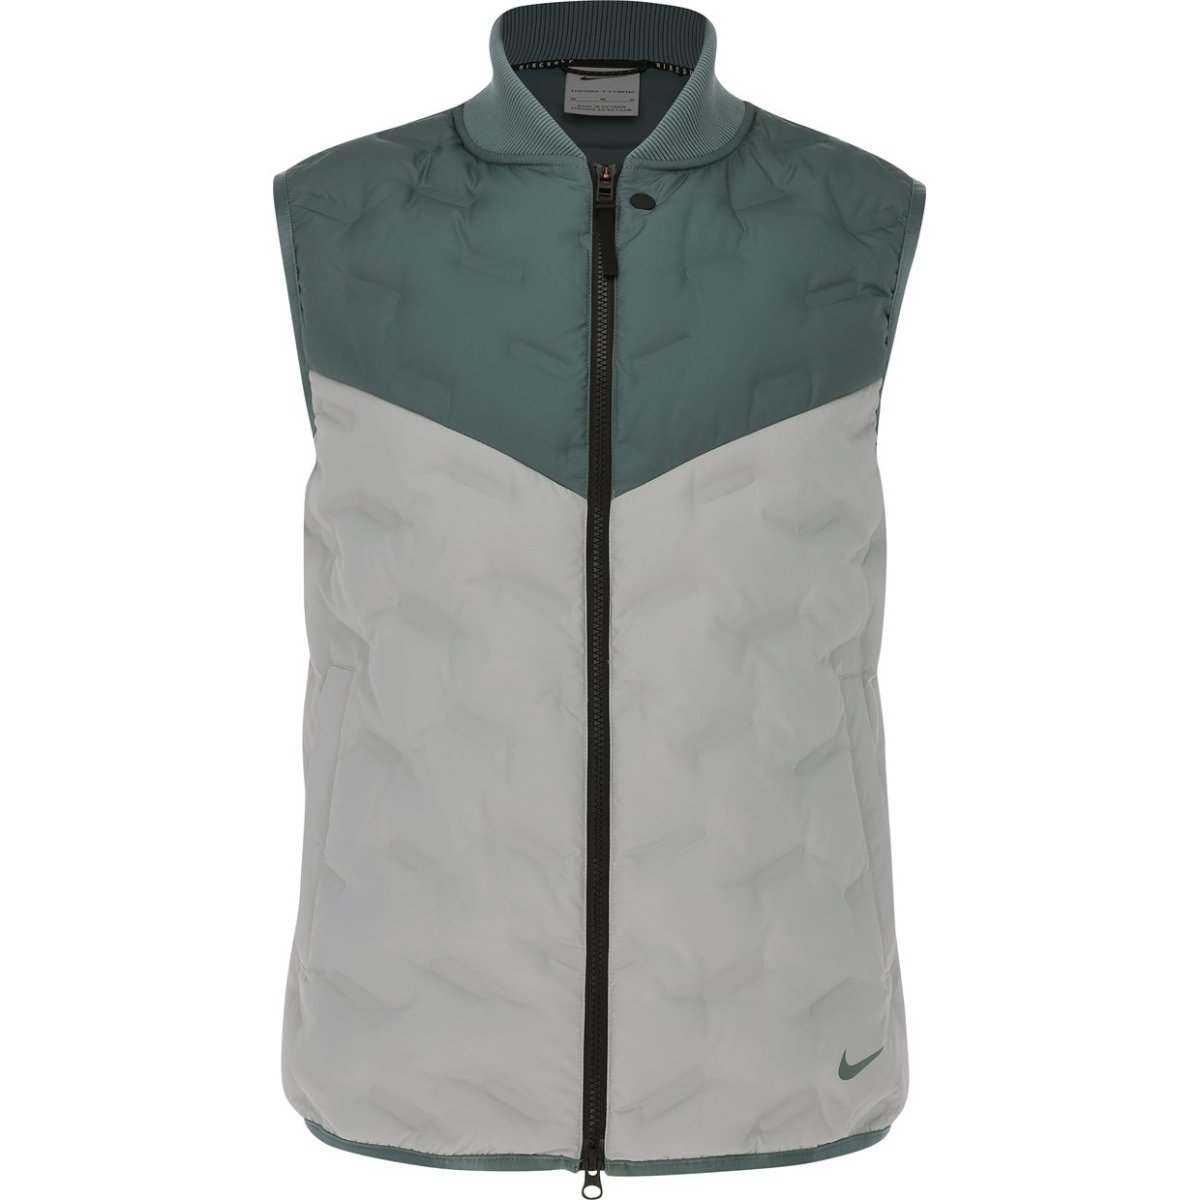 Shop Nike golf vests in Morning Read's online pro shop, powered by GlobalGolf.